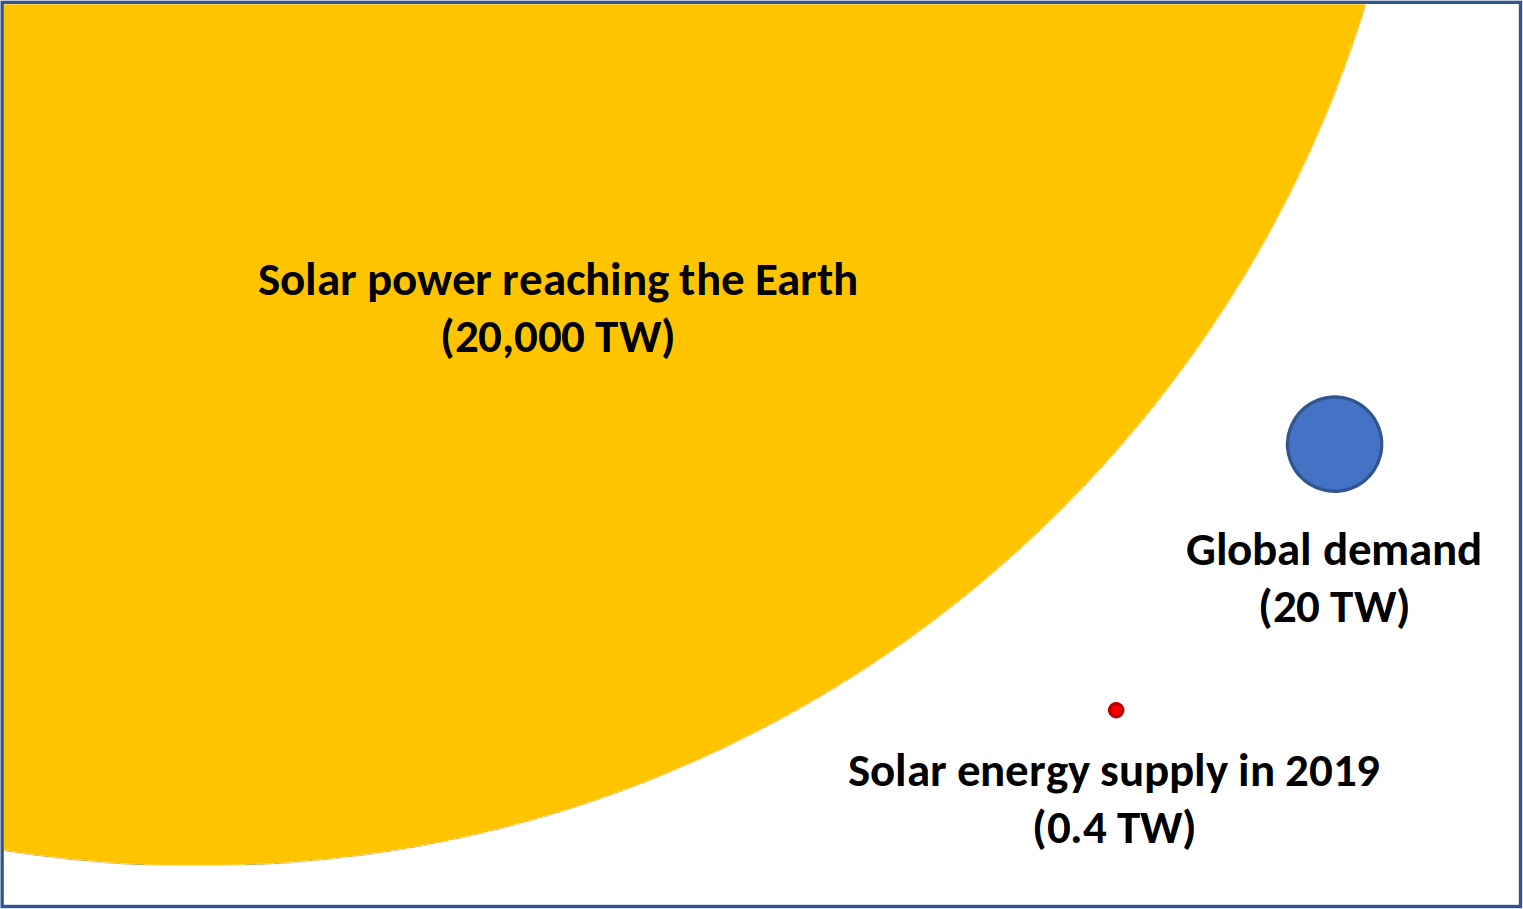 Solar energy compared to demand